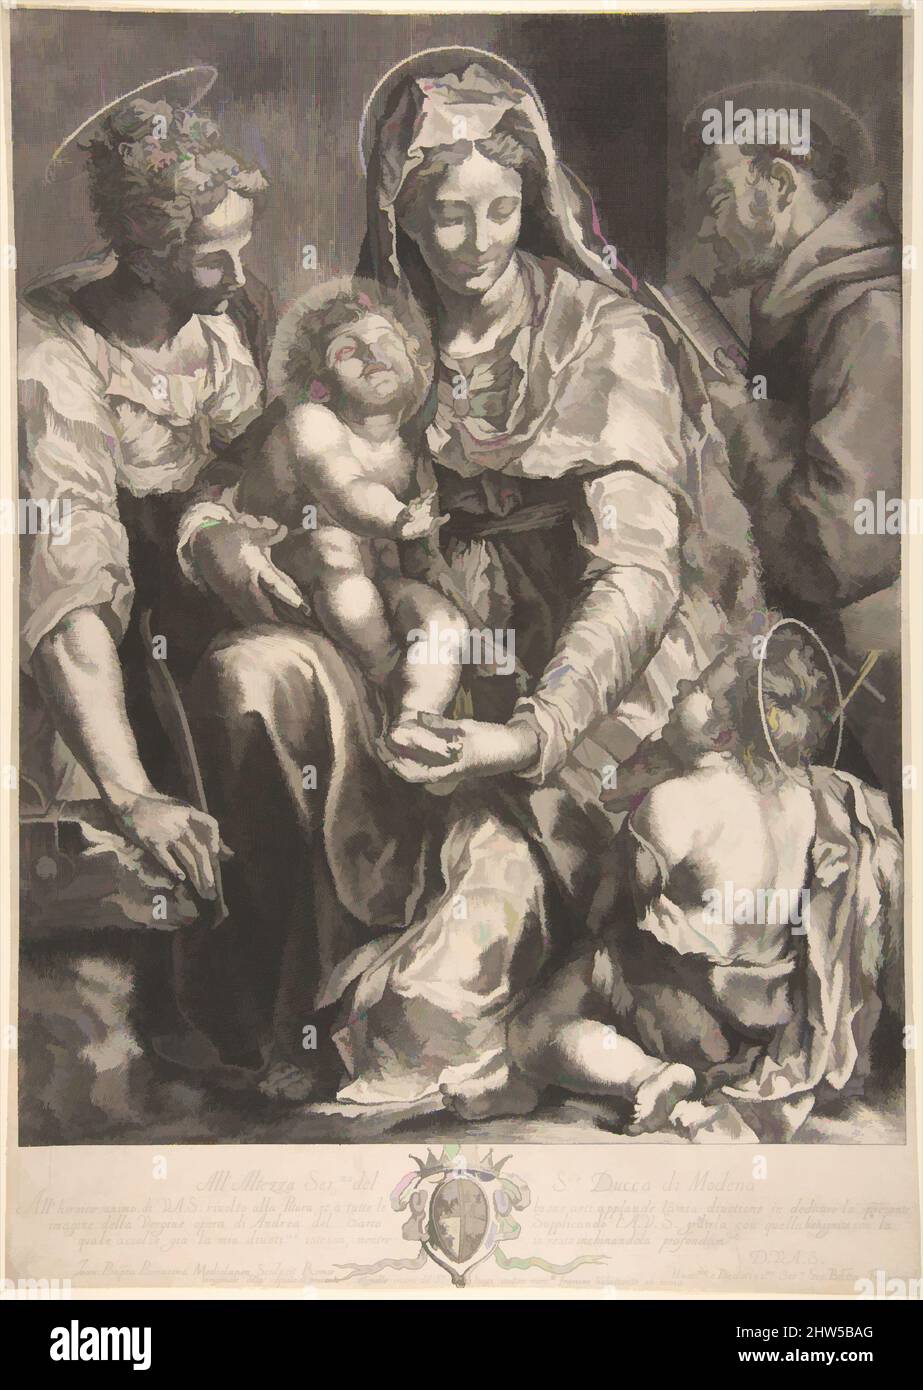 Art inspired by Virgin and Child with Saint Catherine, Francis of Assisi and John the Baptist, 1620–70, Engraving, sheet: 16 1/8 x 11 7/16 in. (41 x 29.1 cm), Prints, Giovanni Battista Bonacina (Italian, Milan 1620–ca. 1670), After Andrea del Sarto (Andrea d'Agnolo) (Italian, Florence, Classic works modernized by Artotop with a splash of modernity. Shapes, color and value, eye-catching visual impact on art. Emotions through freedom of artworks in a contemporary way. A timeless message pursuing a wildly creative new direction. Artists turning to the digital medium and creating the Artotop NFT Stock Photo